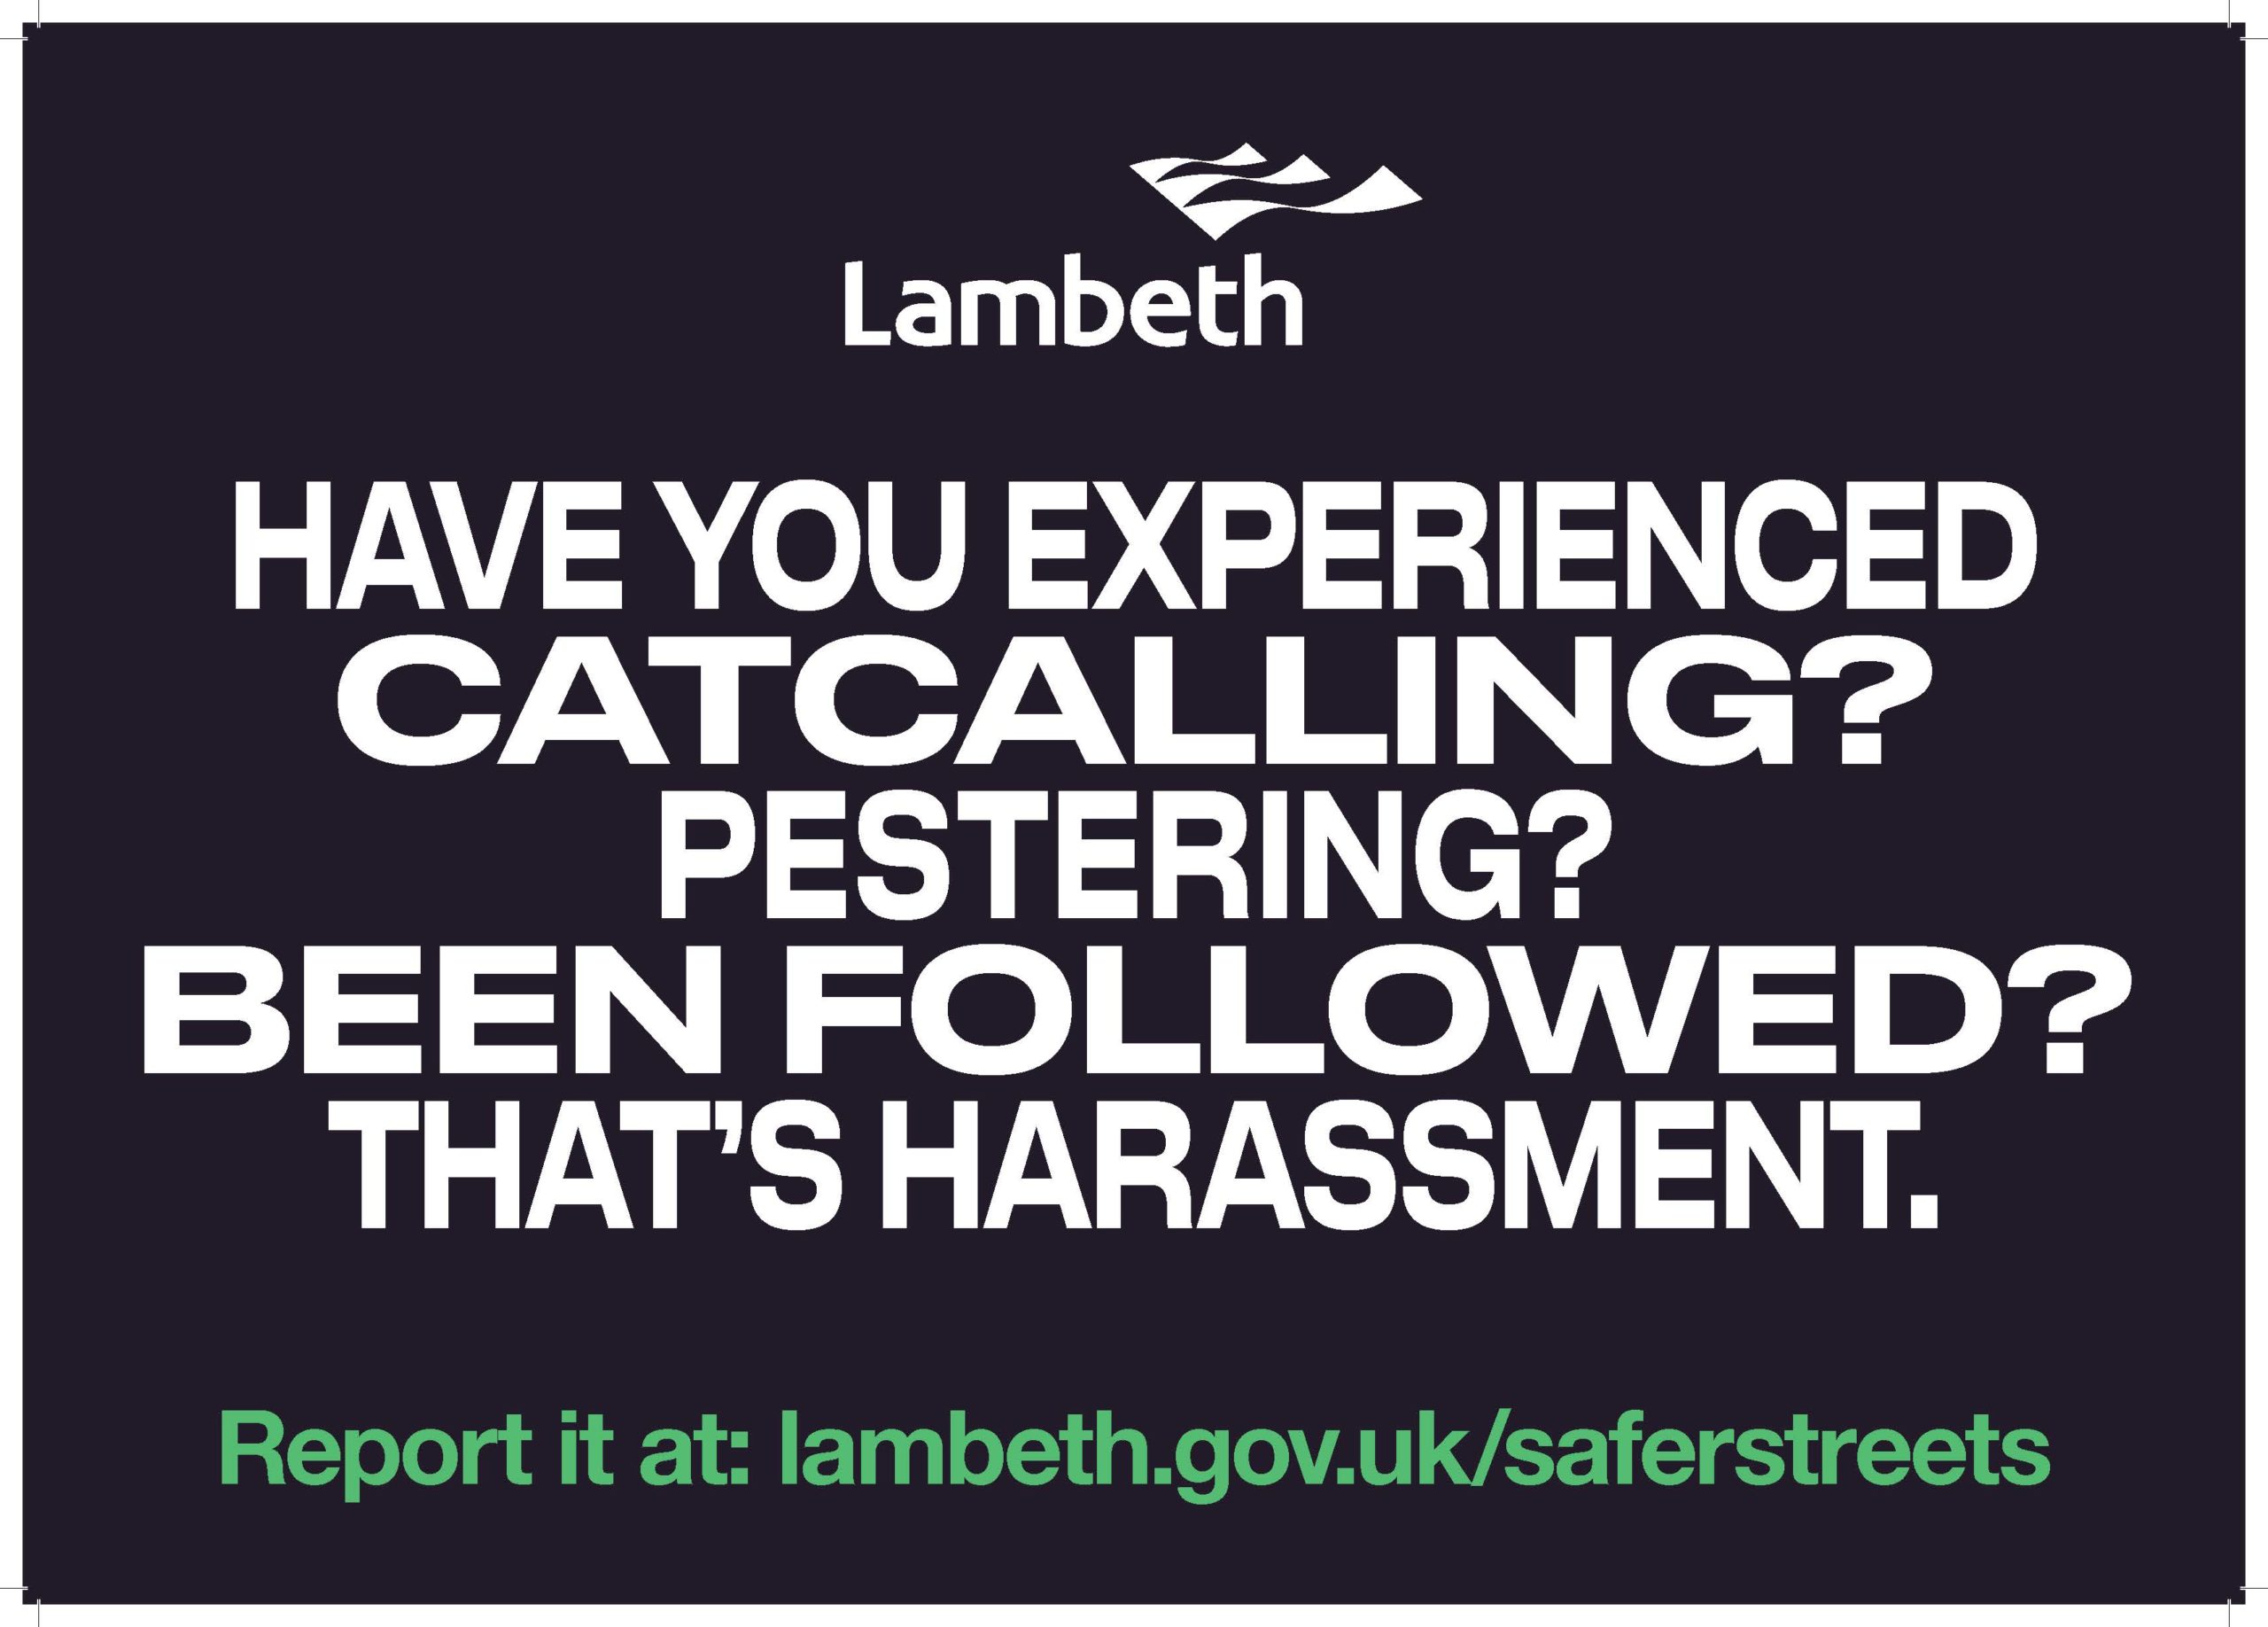 South London: Keeping women safe from harassment and tackling offending